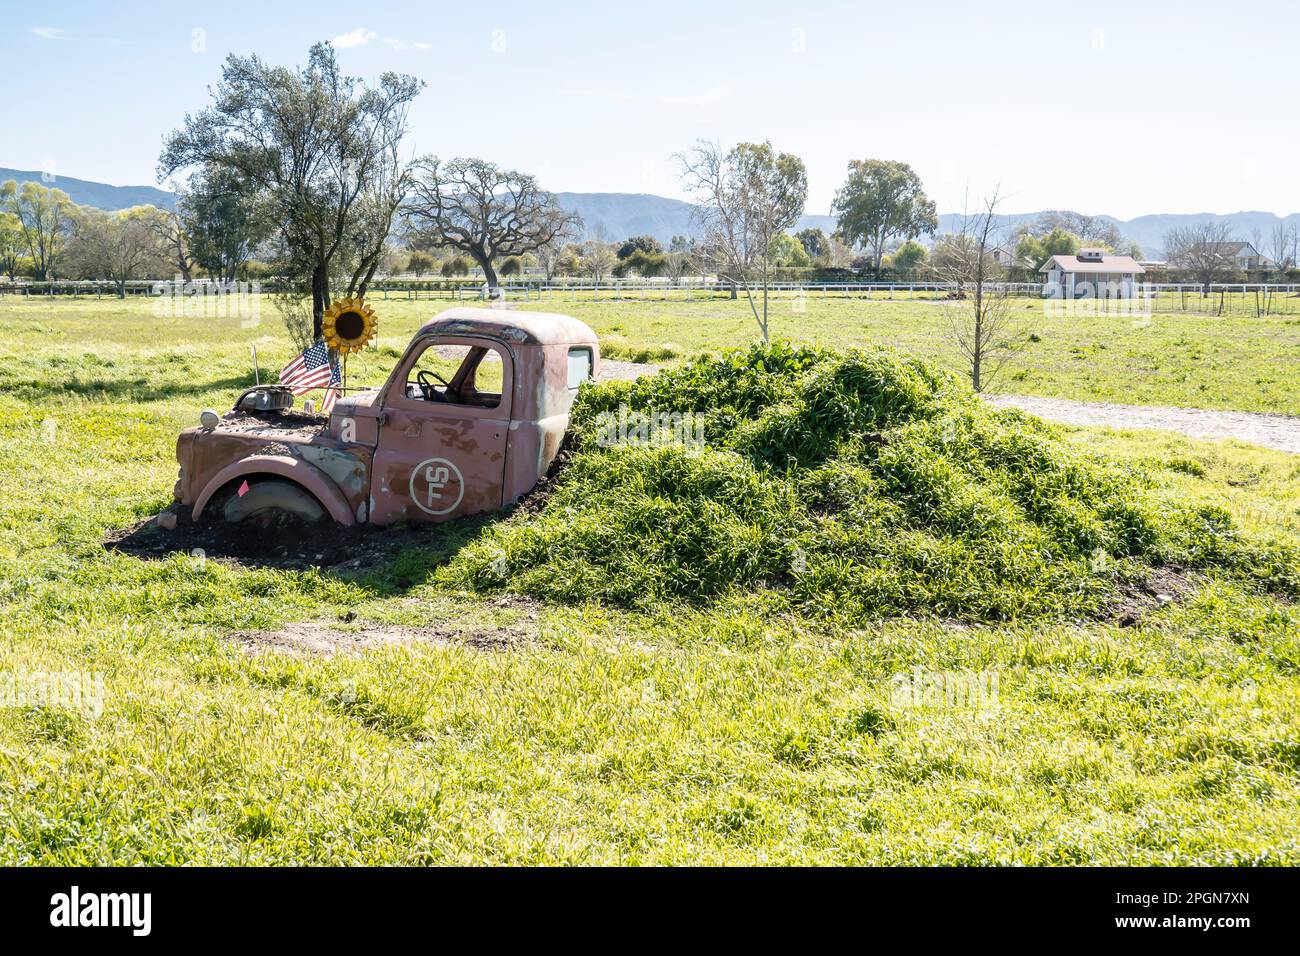 Half buried old rusted pickup truck in a mound of grass on a farm in Los Olivos, California. It could thought of as installation art. Stock Photo